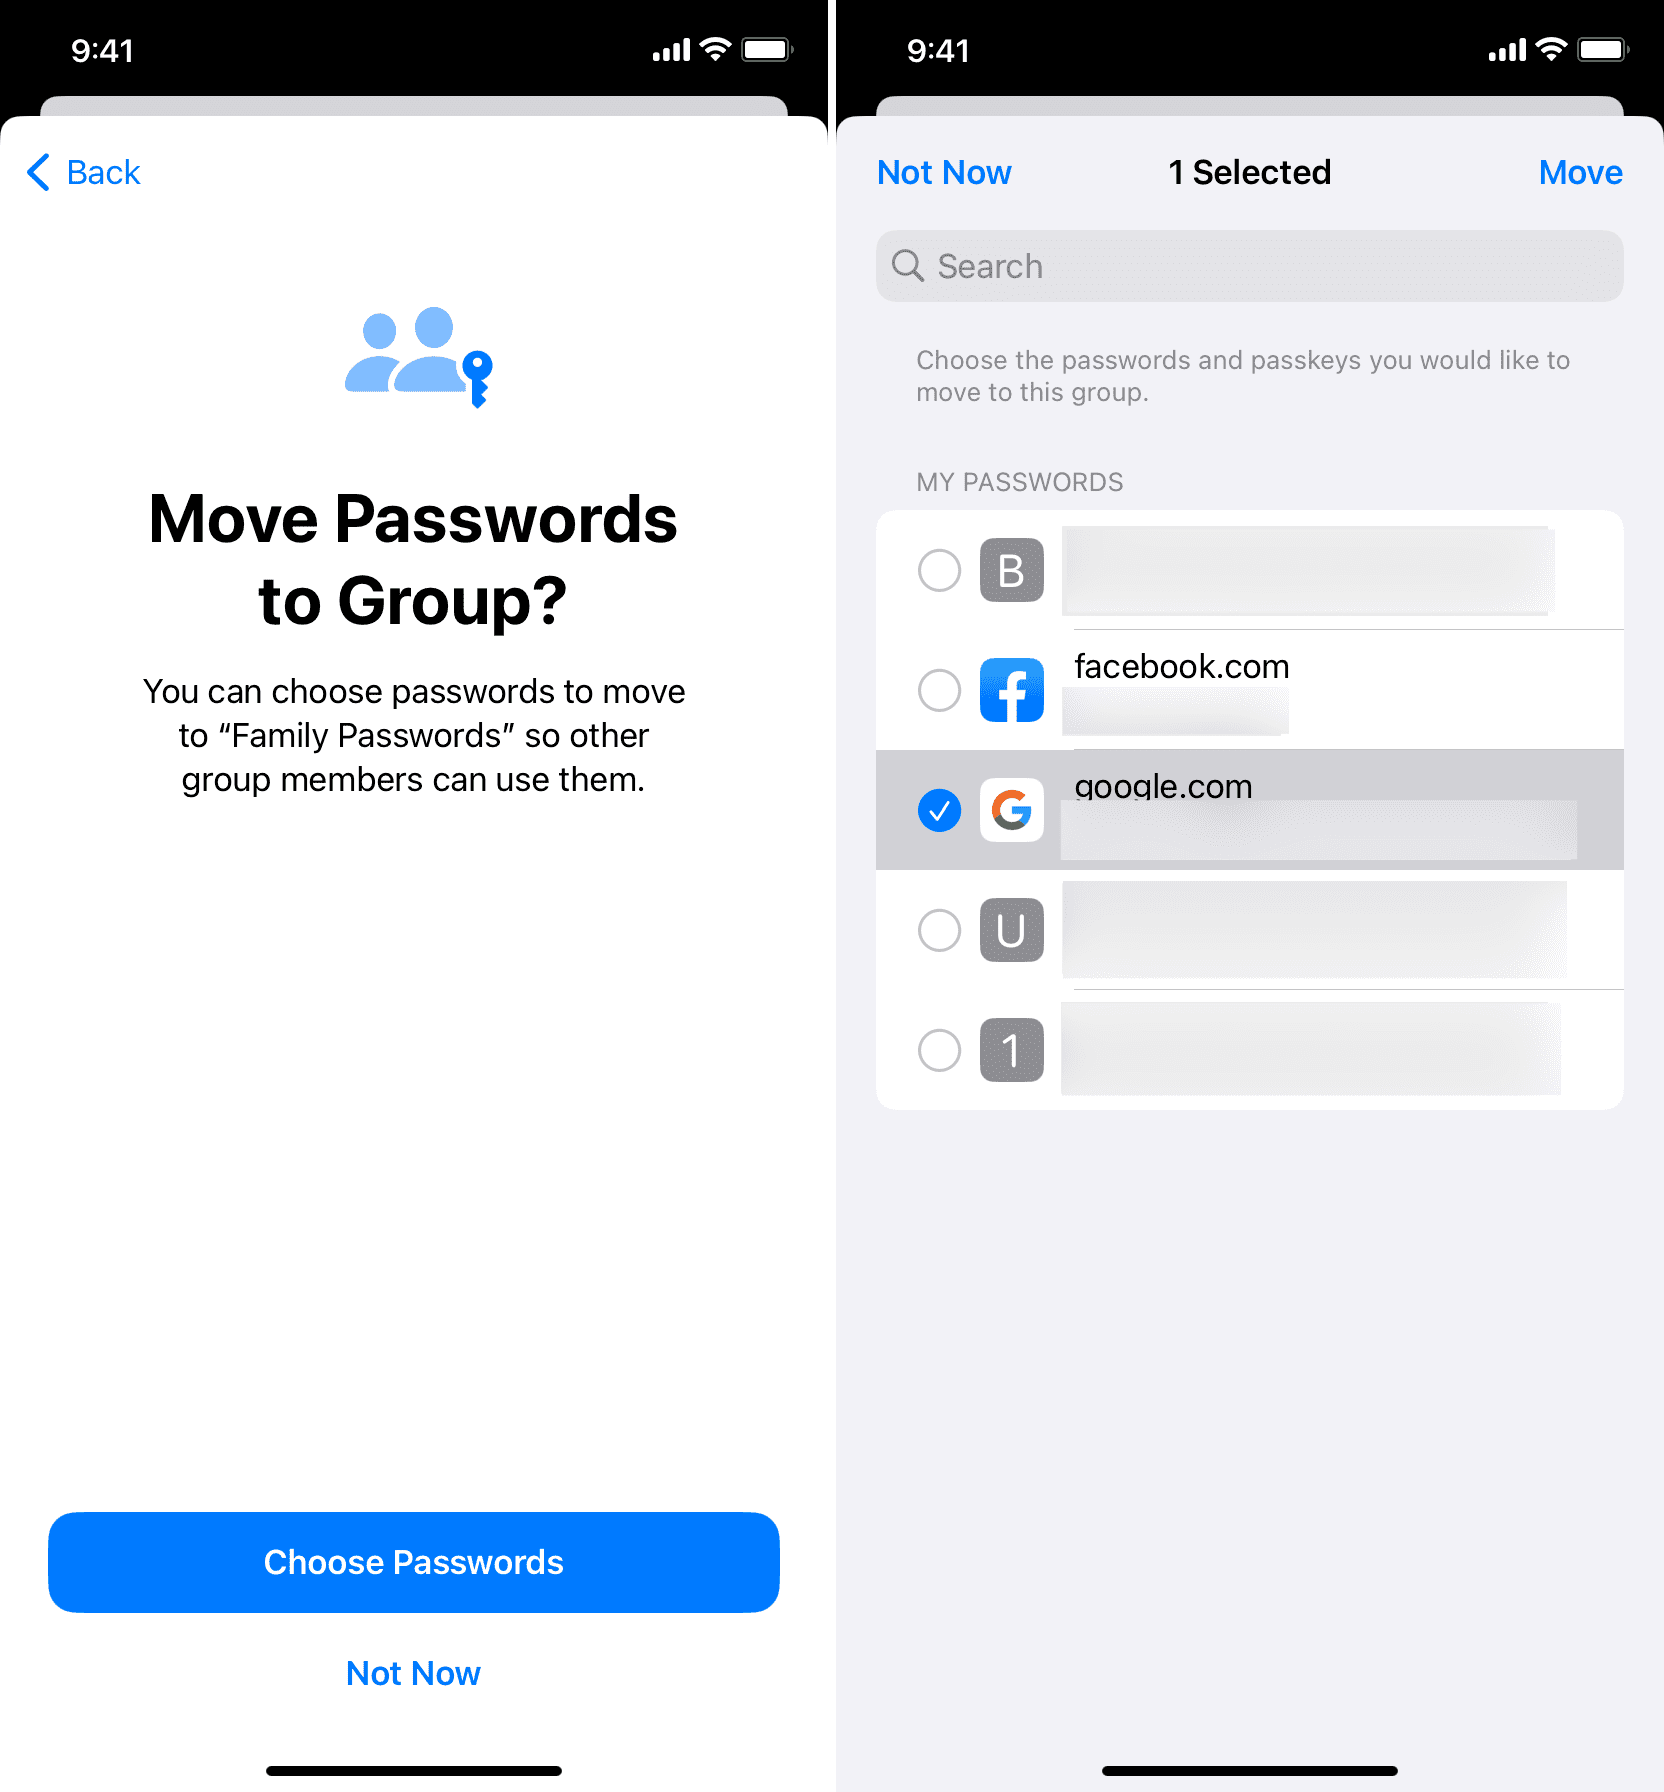 Move Passwords to Group alert on iPhone